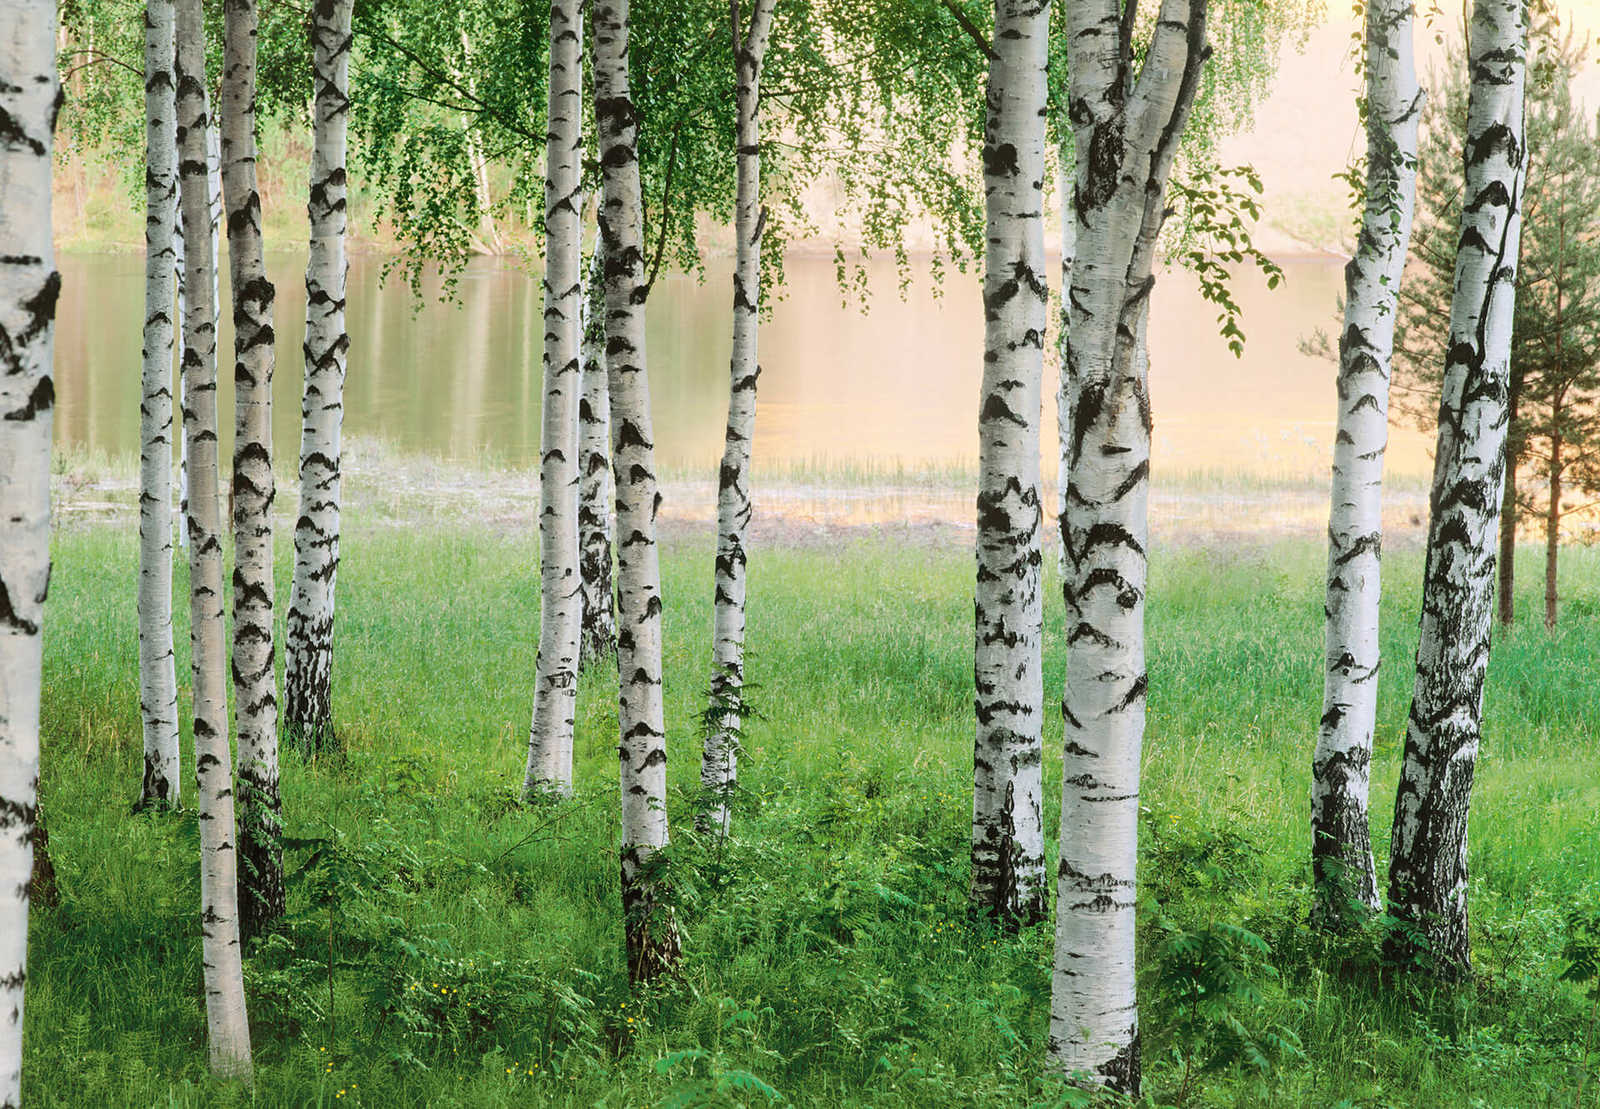         Forest mural birch trees by the lake
    